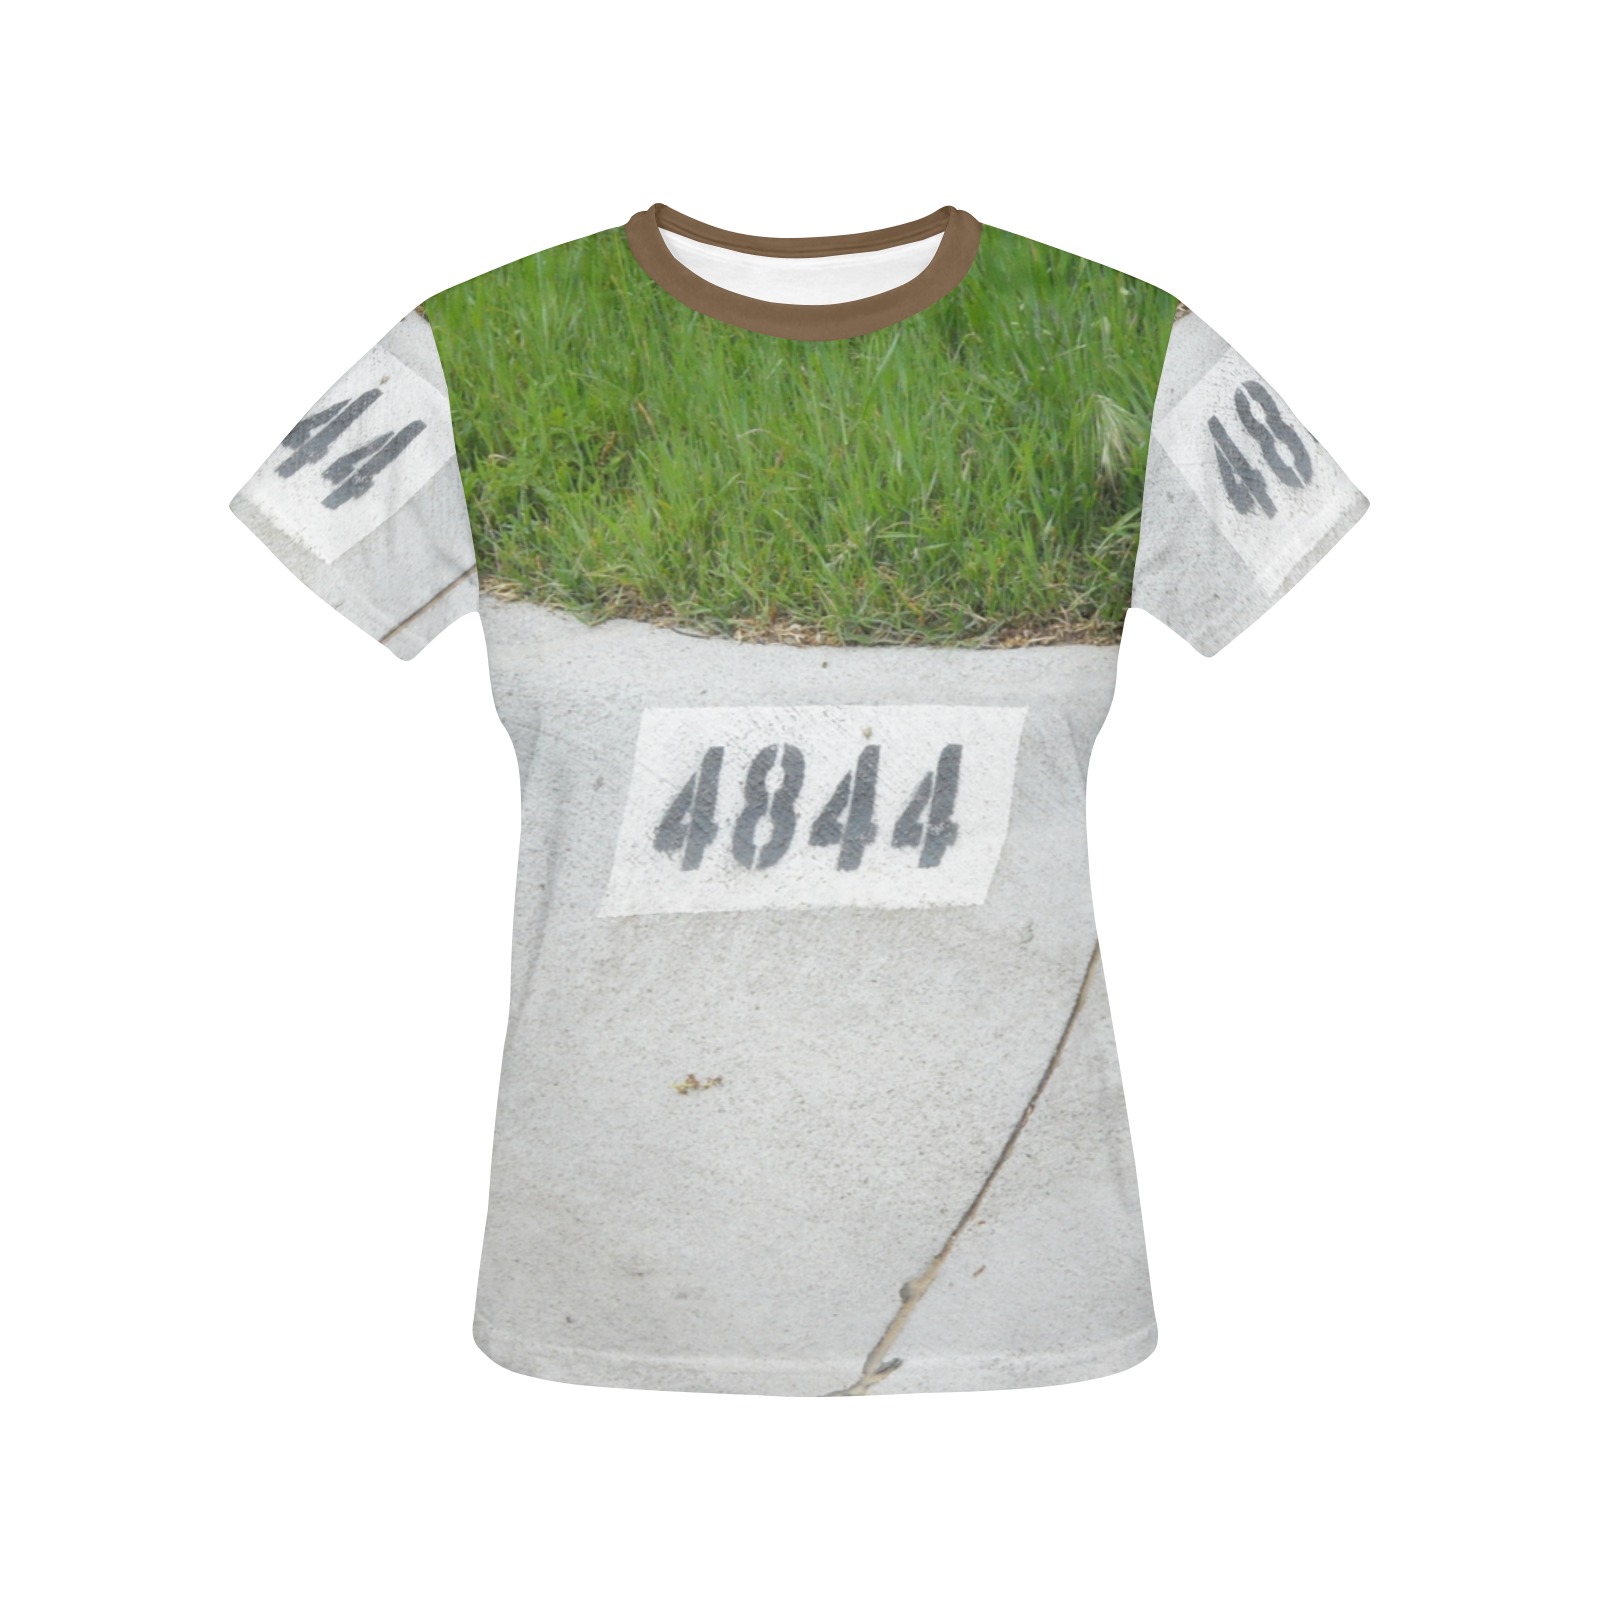 Street Number 4844 with brown collar Women's All Over Print Crew Neck T-Shirt (Model T40-2)